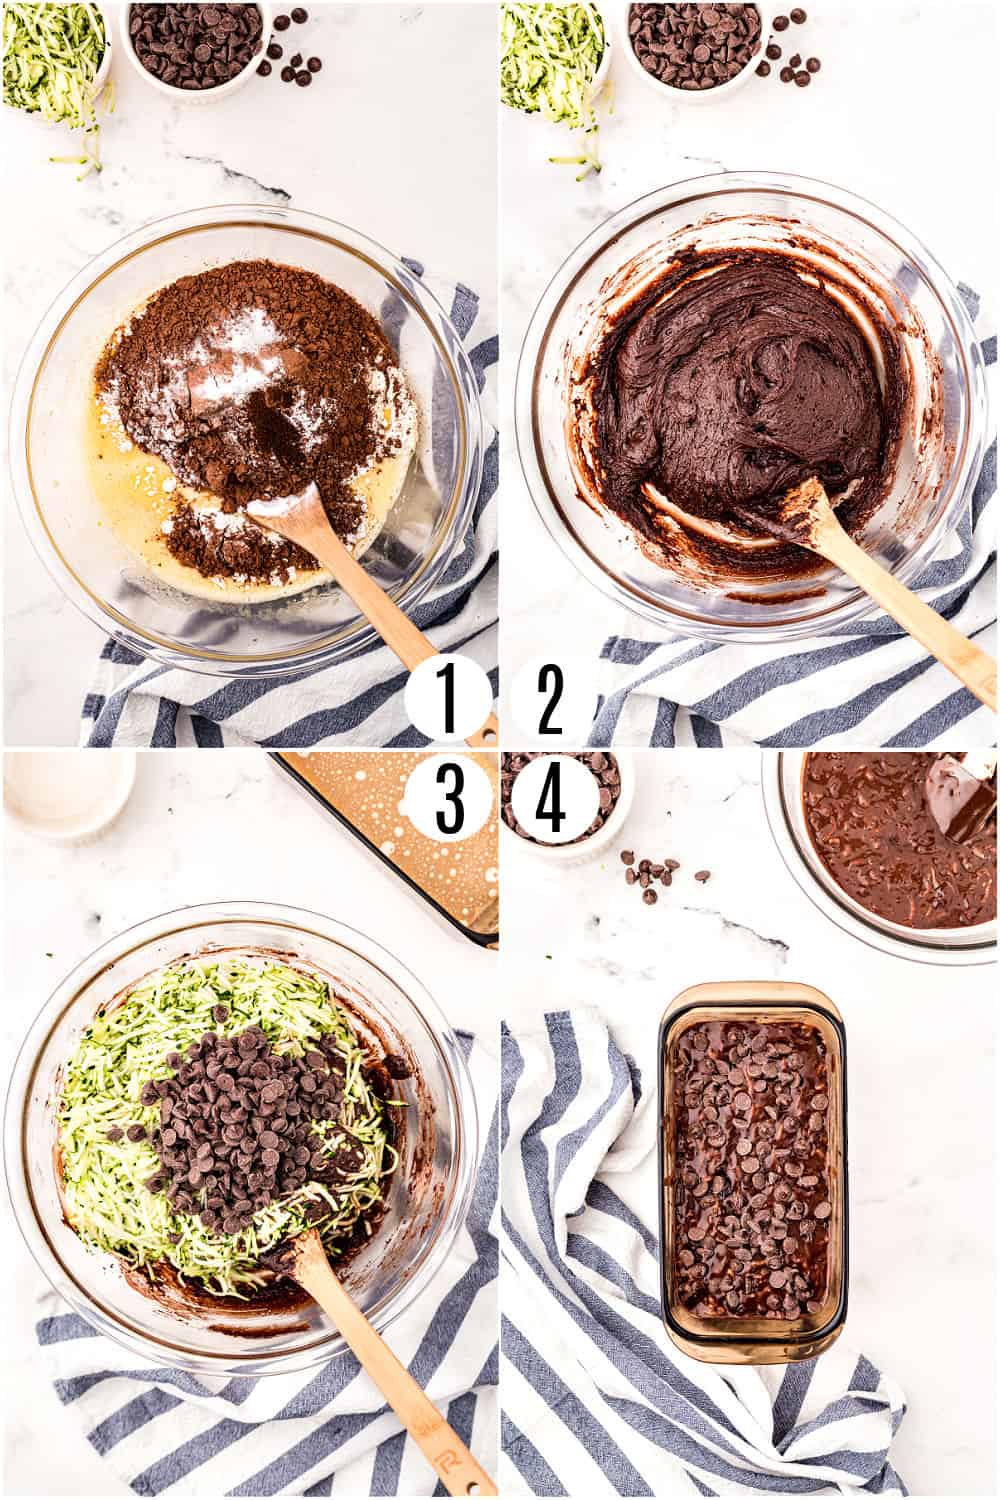 Step by step photos showing how to make zucchini bread with chocolate.